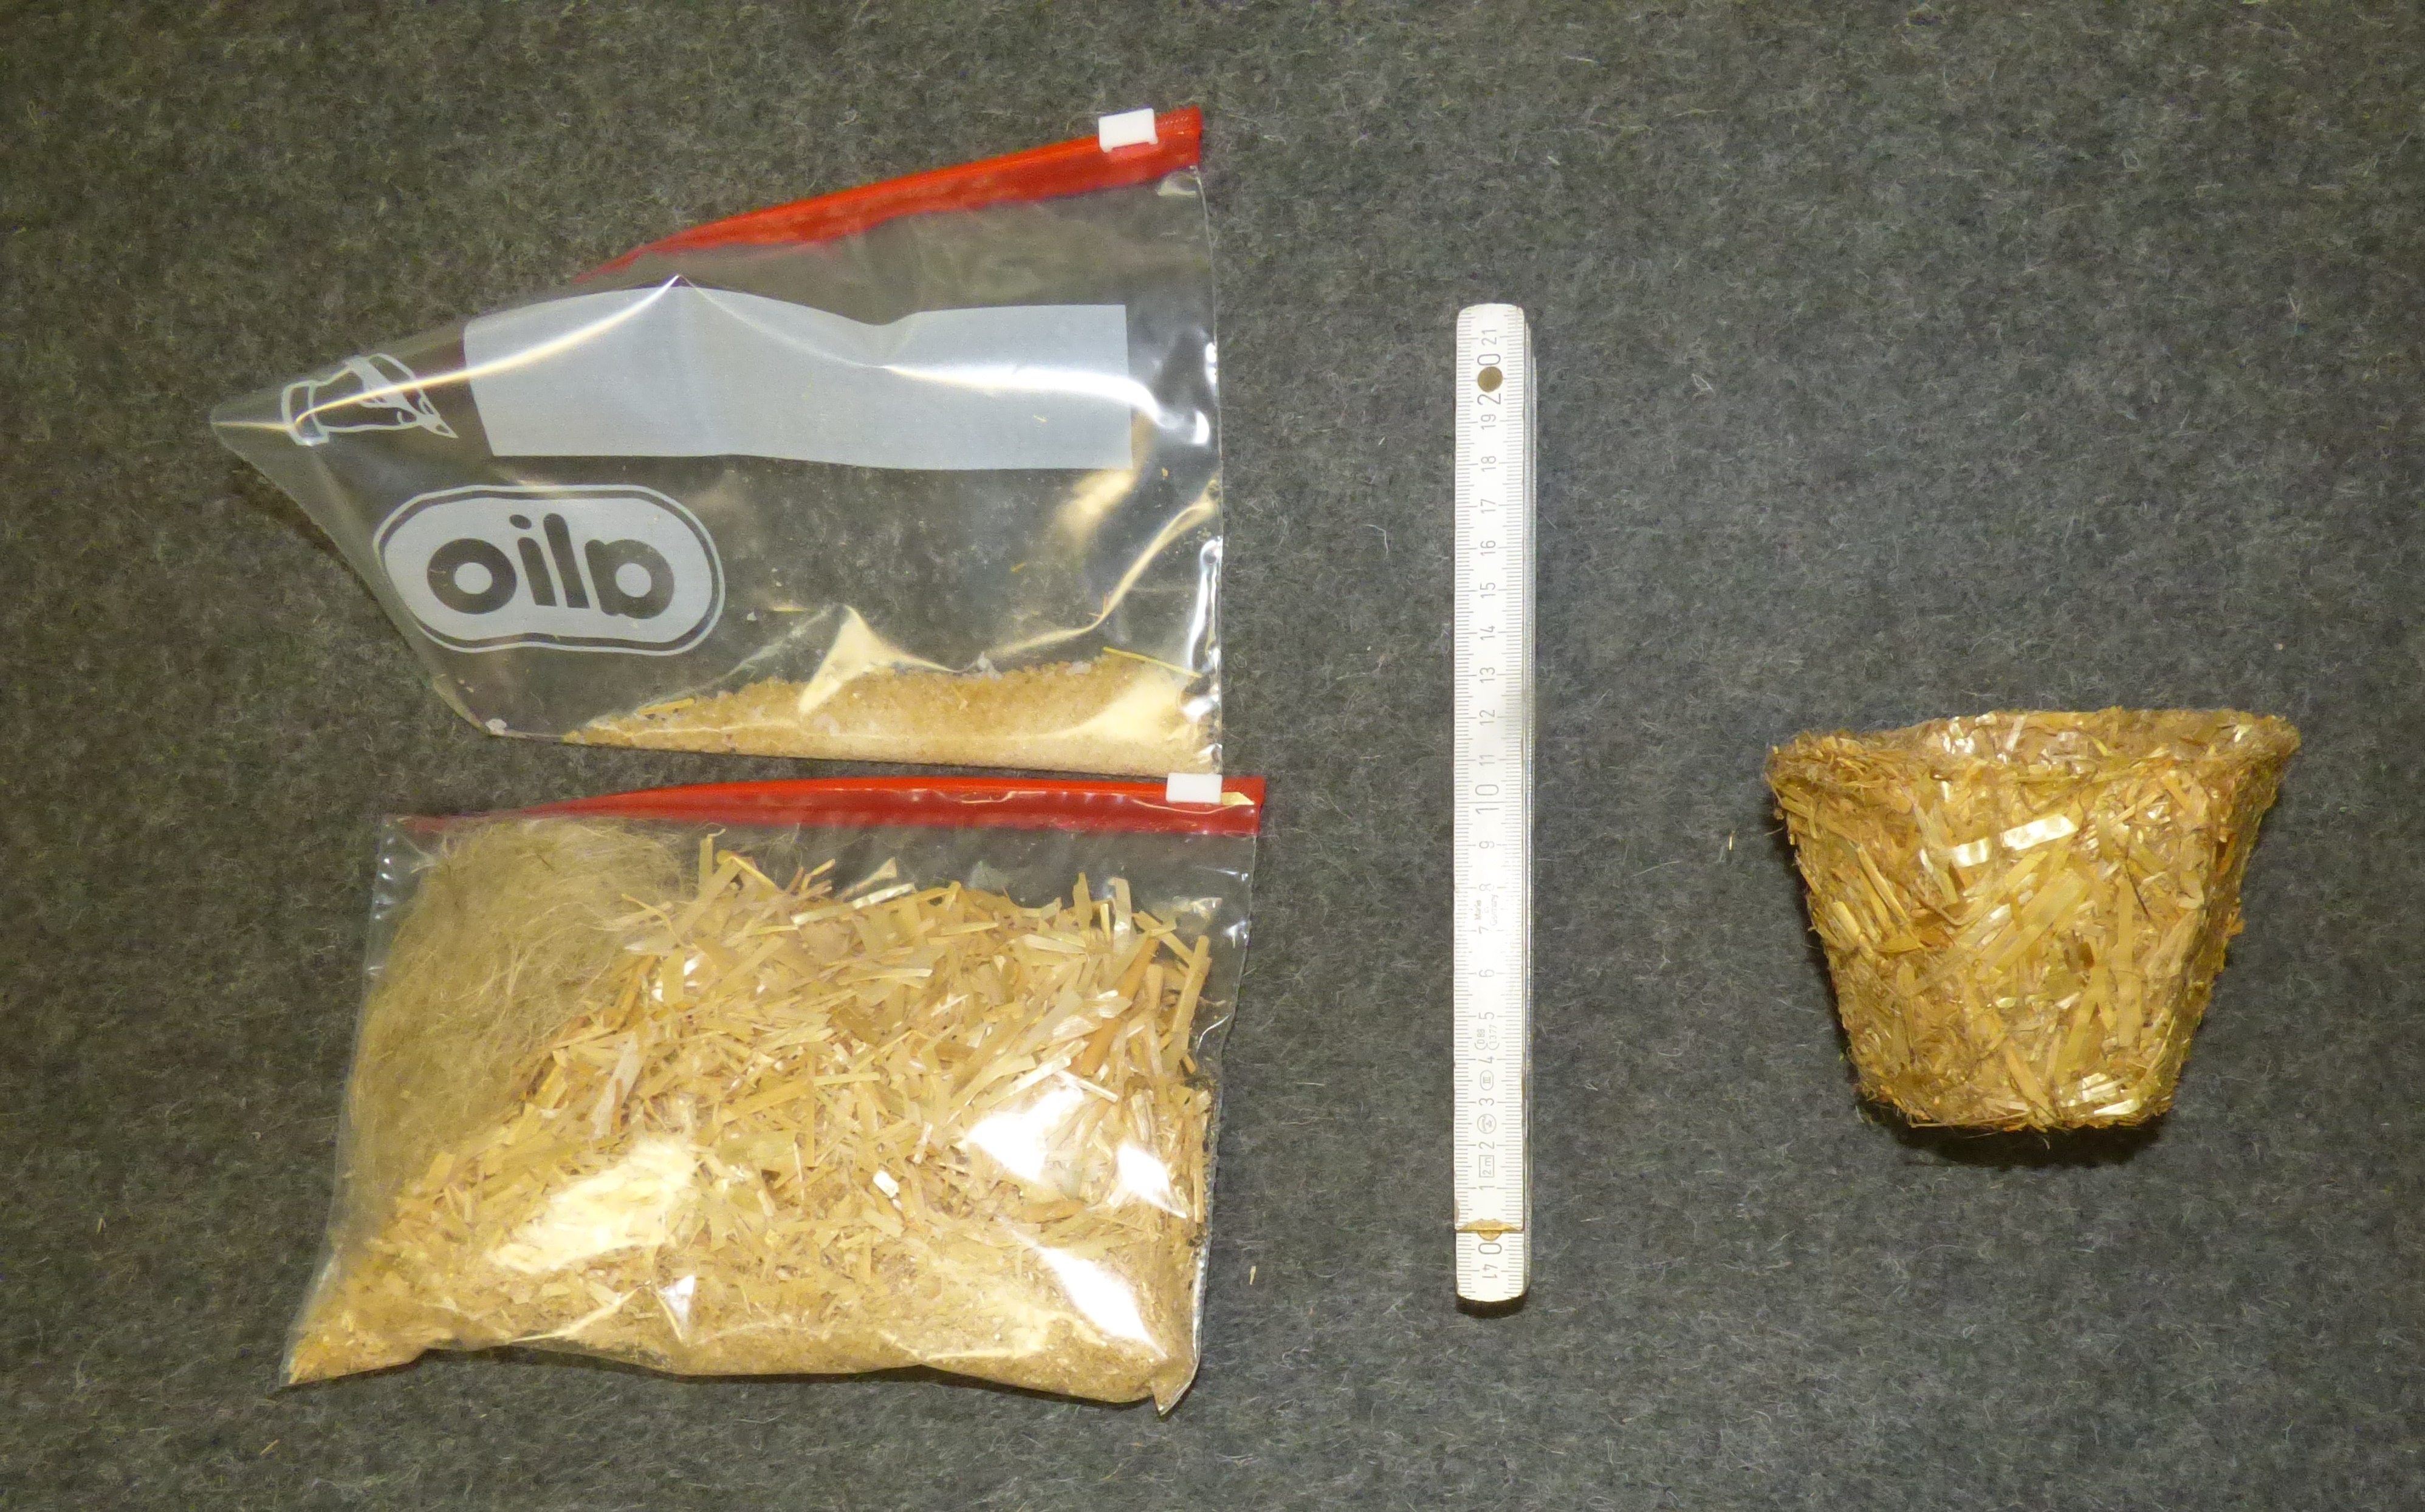 Two plastic bags filled with plant fibres and binder, a ruler for size estimation, and a plant pot